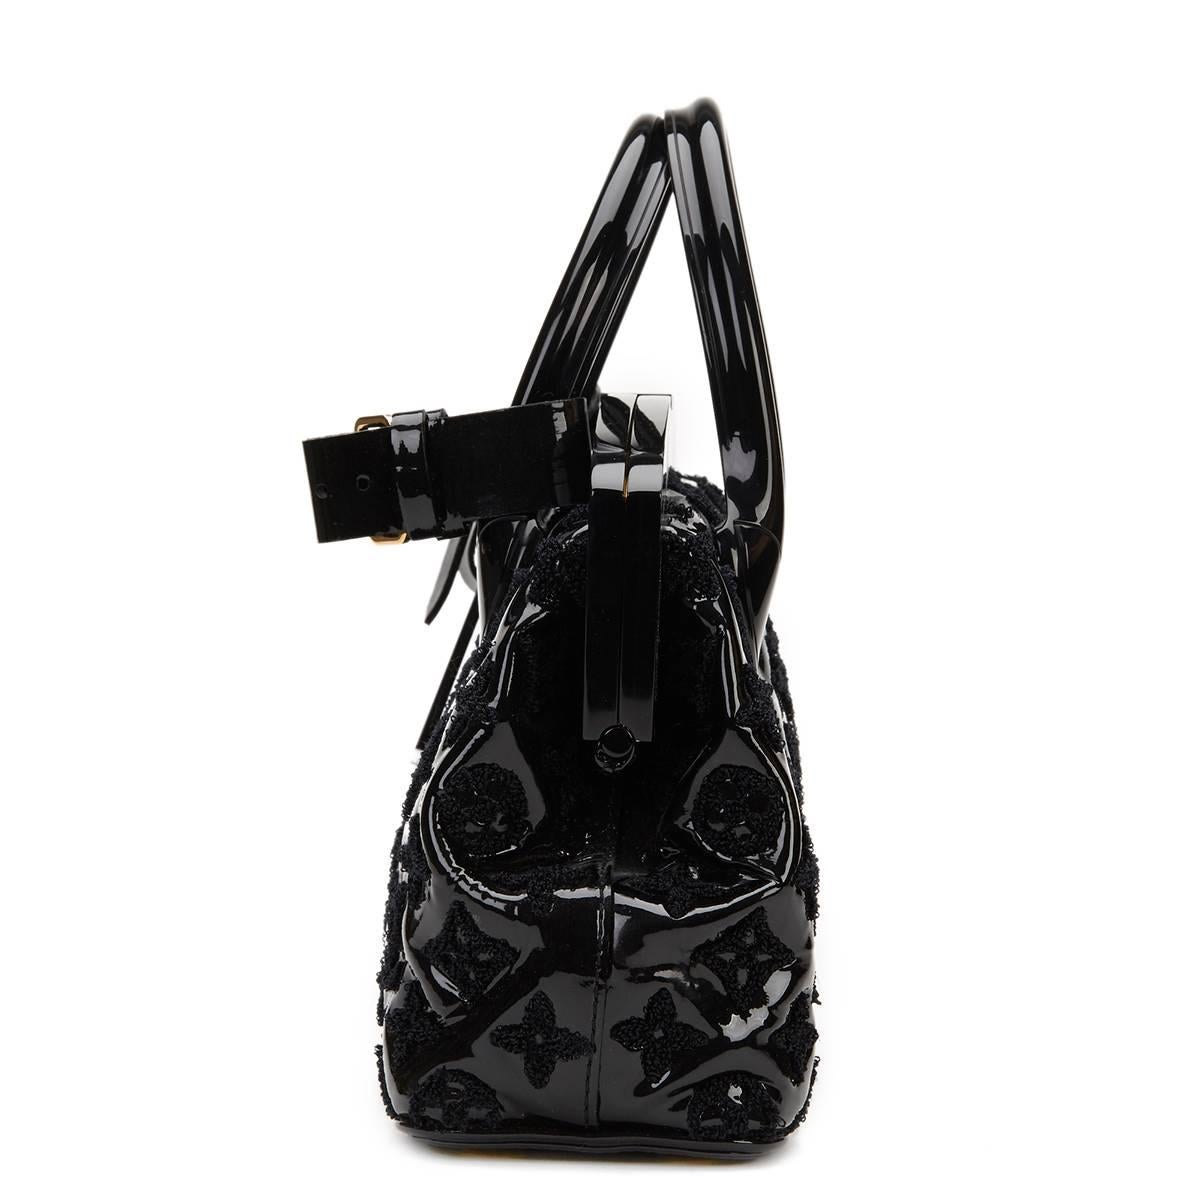 LOUIS VUITTON
Black Patent Leather Monogram Fascination Lockit BB Frame

This LOUIS VUITTON Lockit BB Frame is in Excellent Pre-Owned Condition accompanied by Louis Vuitton Dust Bag, Care Booklet. Circa 2011. Primarily made from Patent Leather